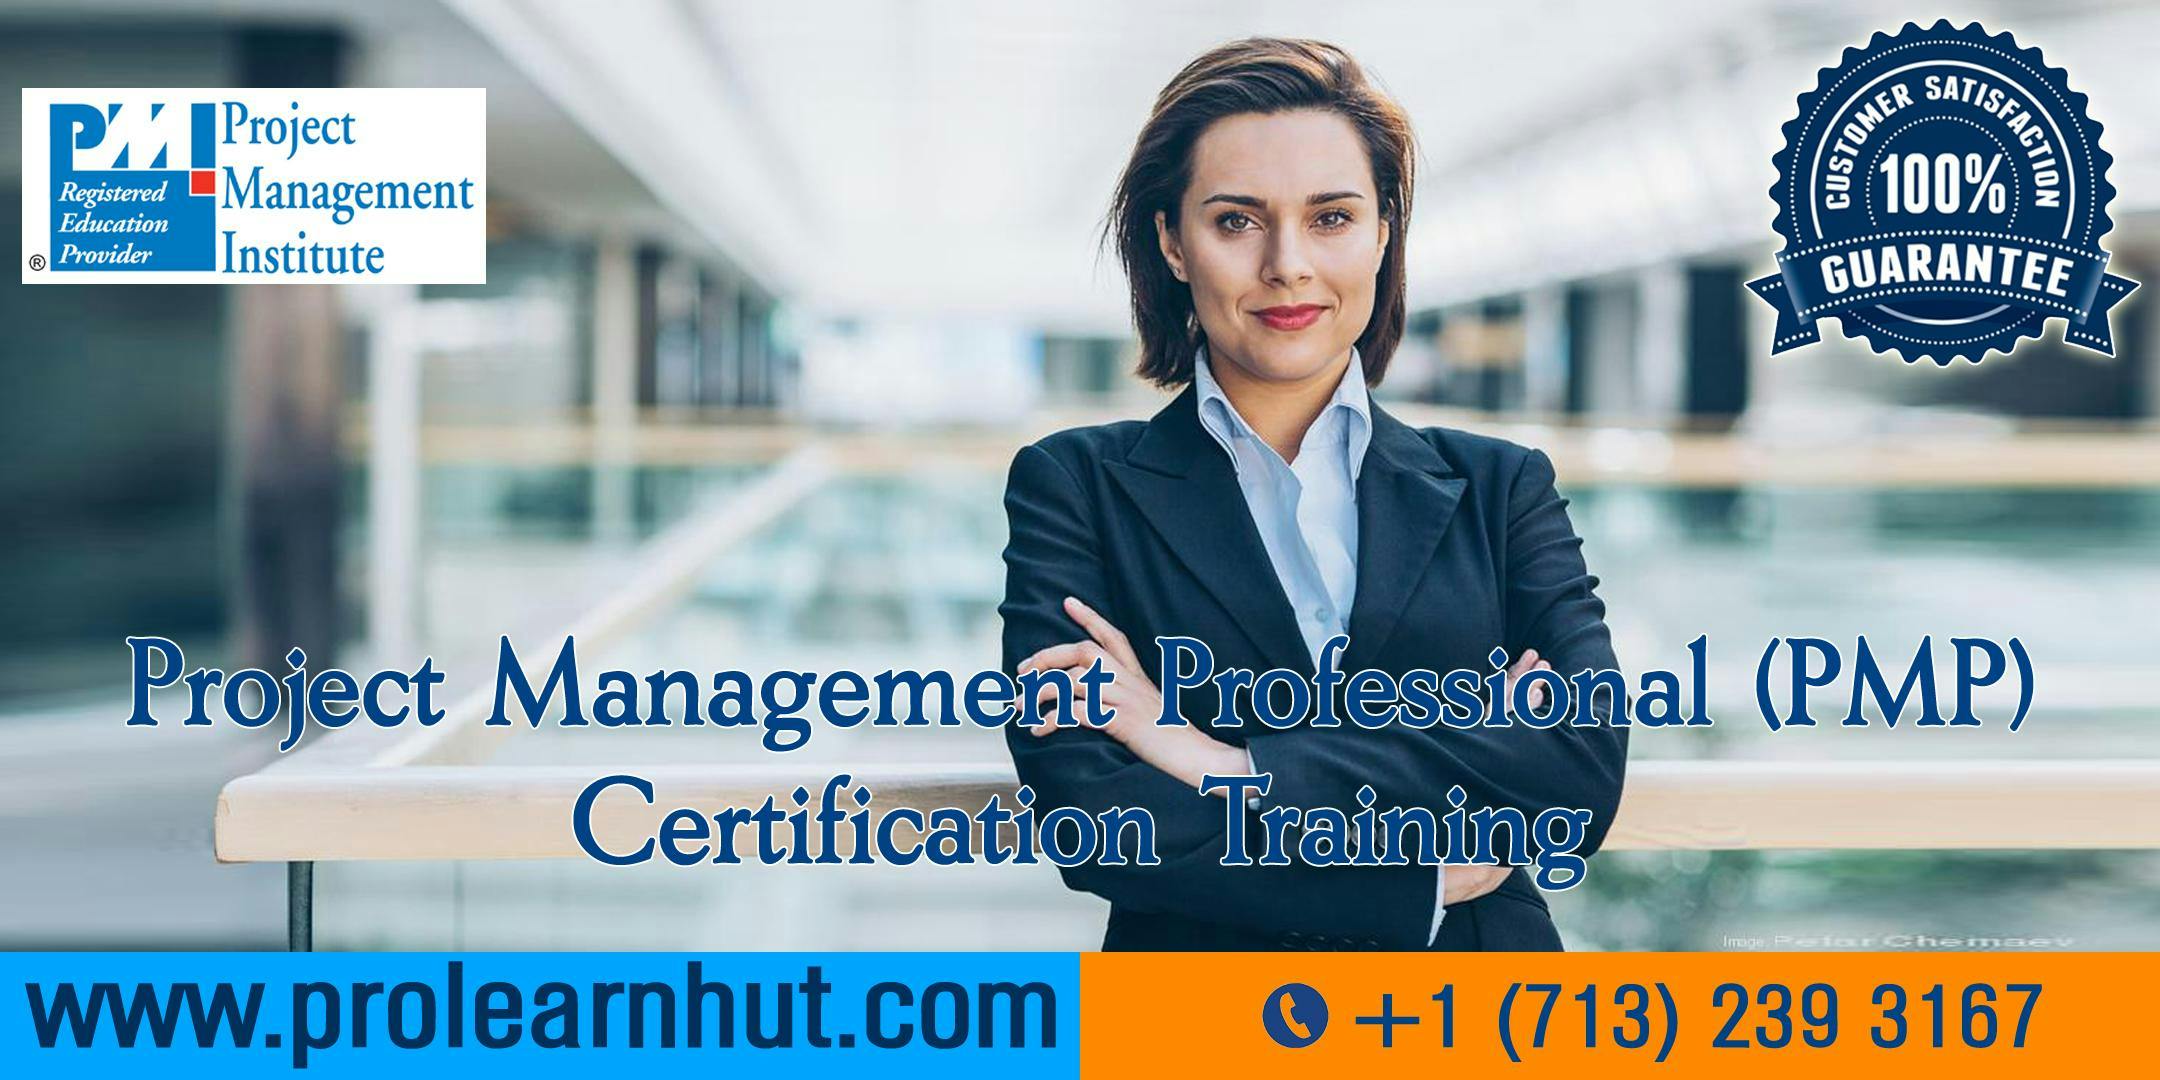 PMP Certification | Project Management Certification| PMP Training in Riverside, CA | ProLearnHut